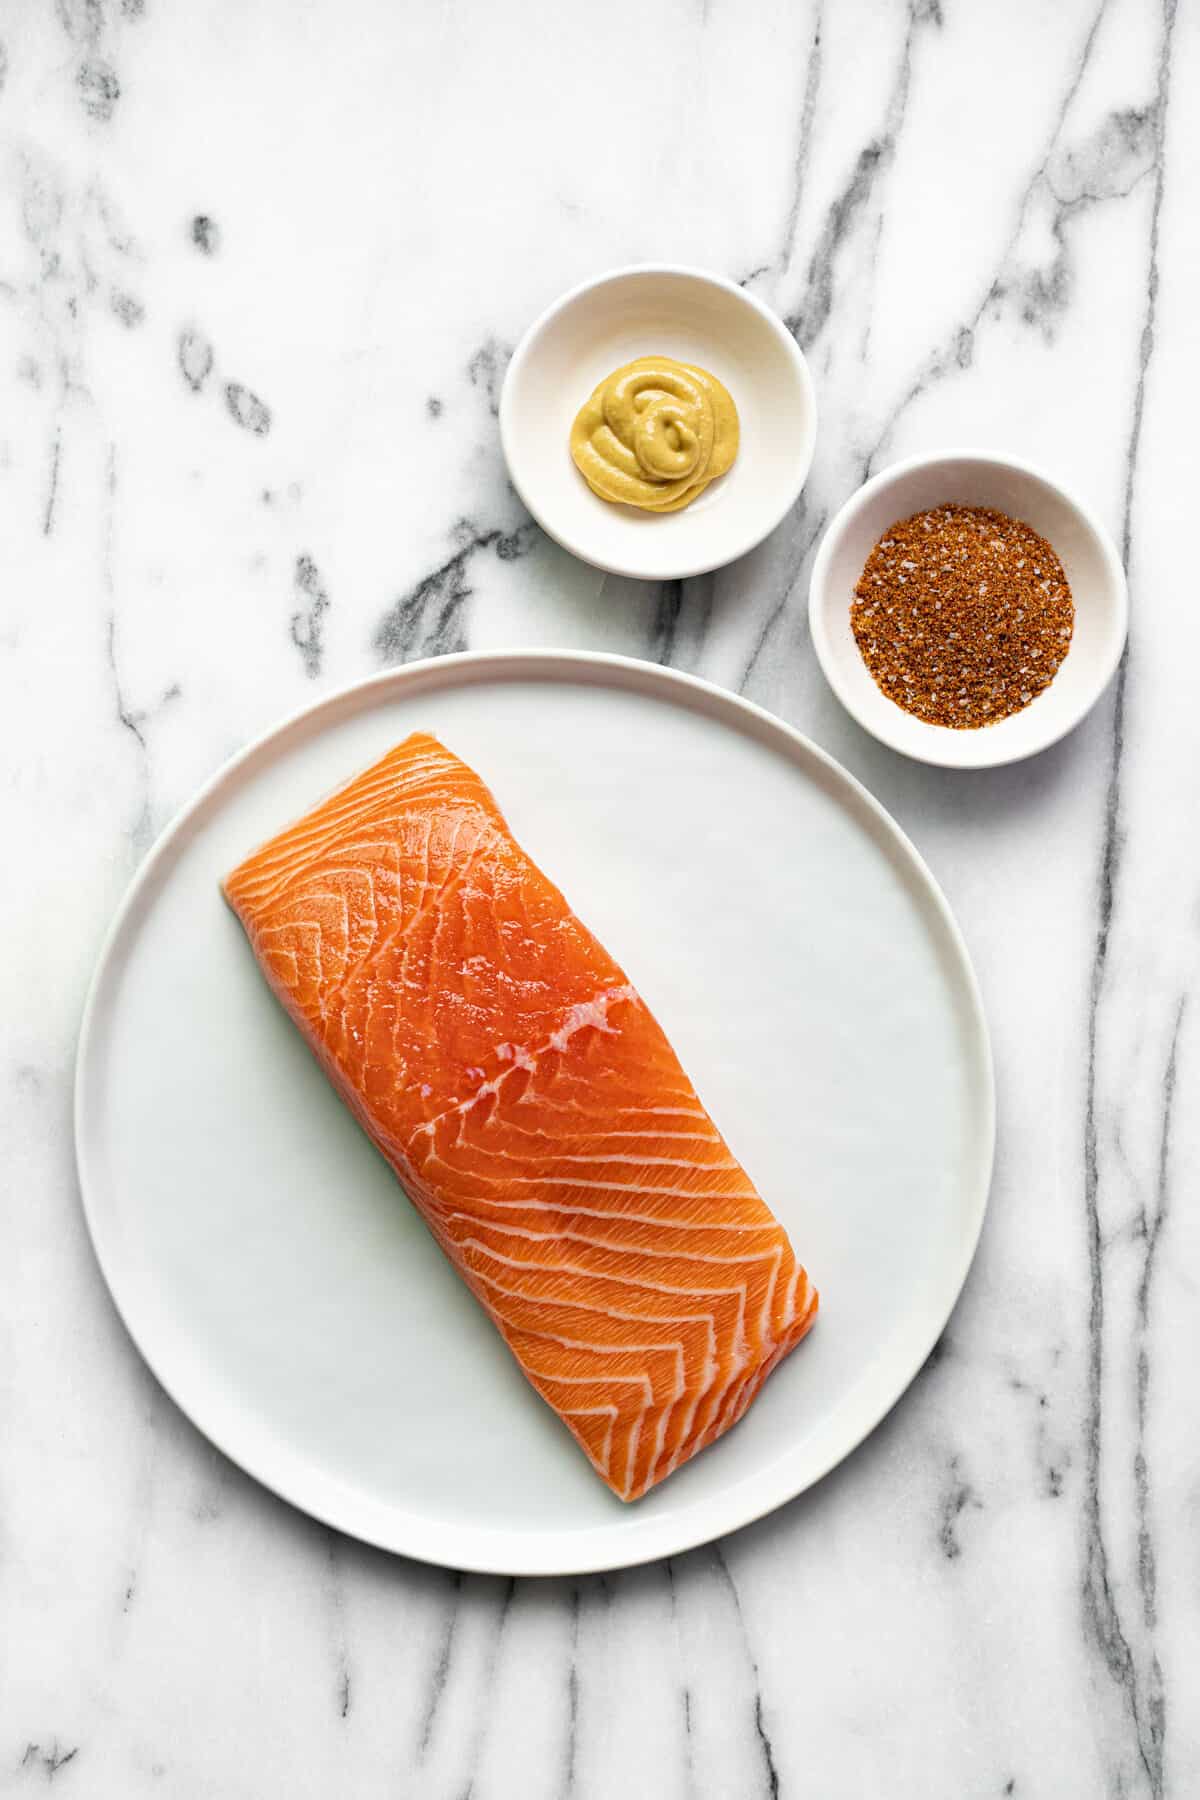 White marble counter top with ingredients to make smoked salmon.